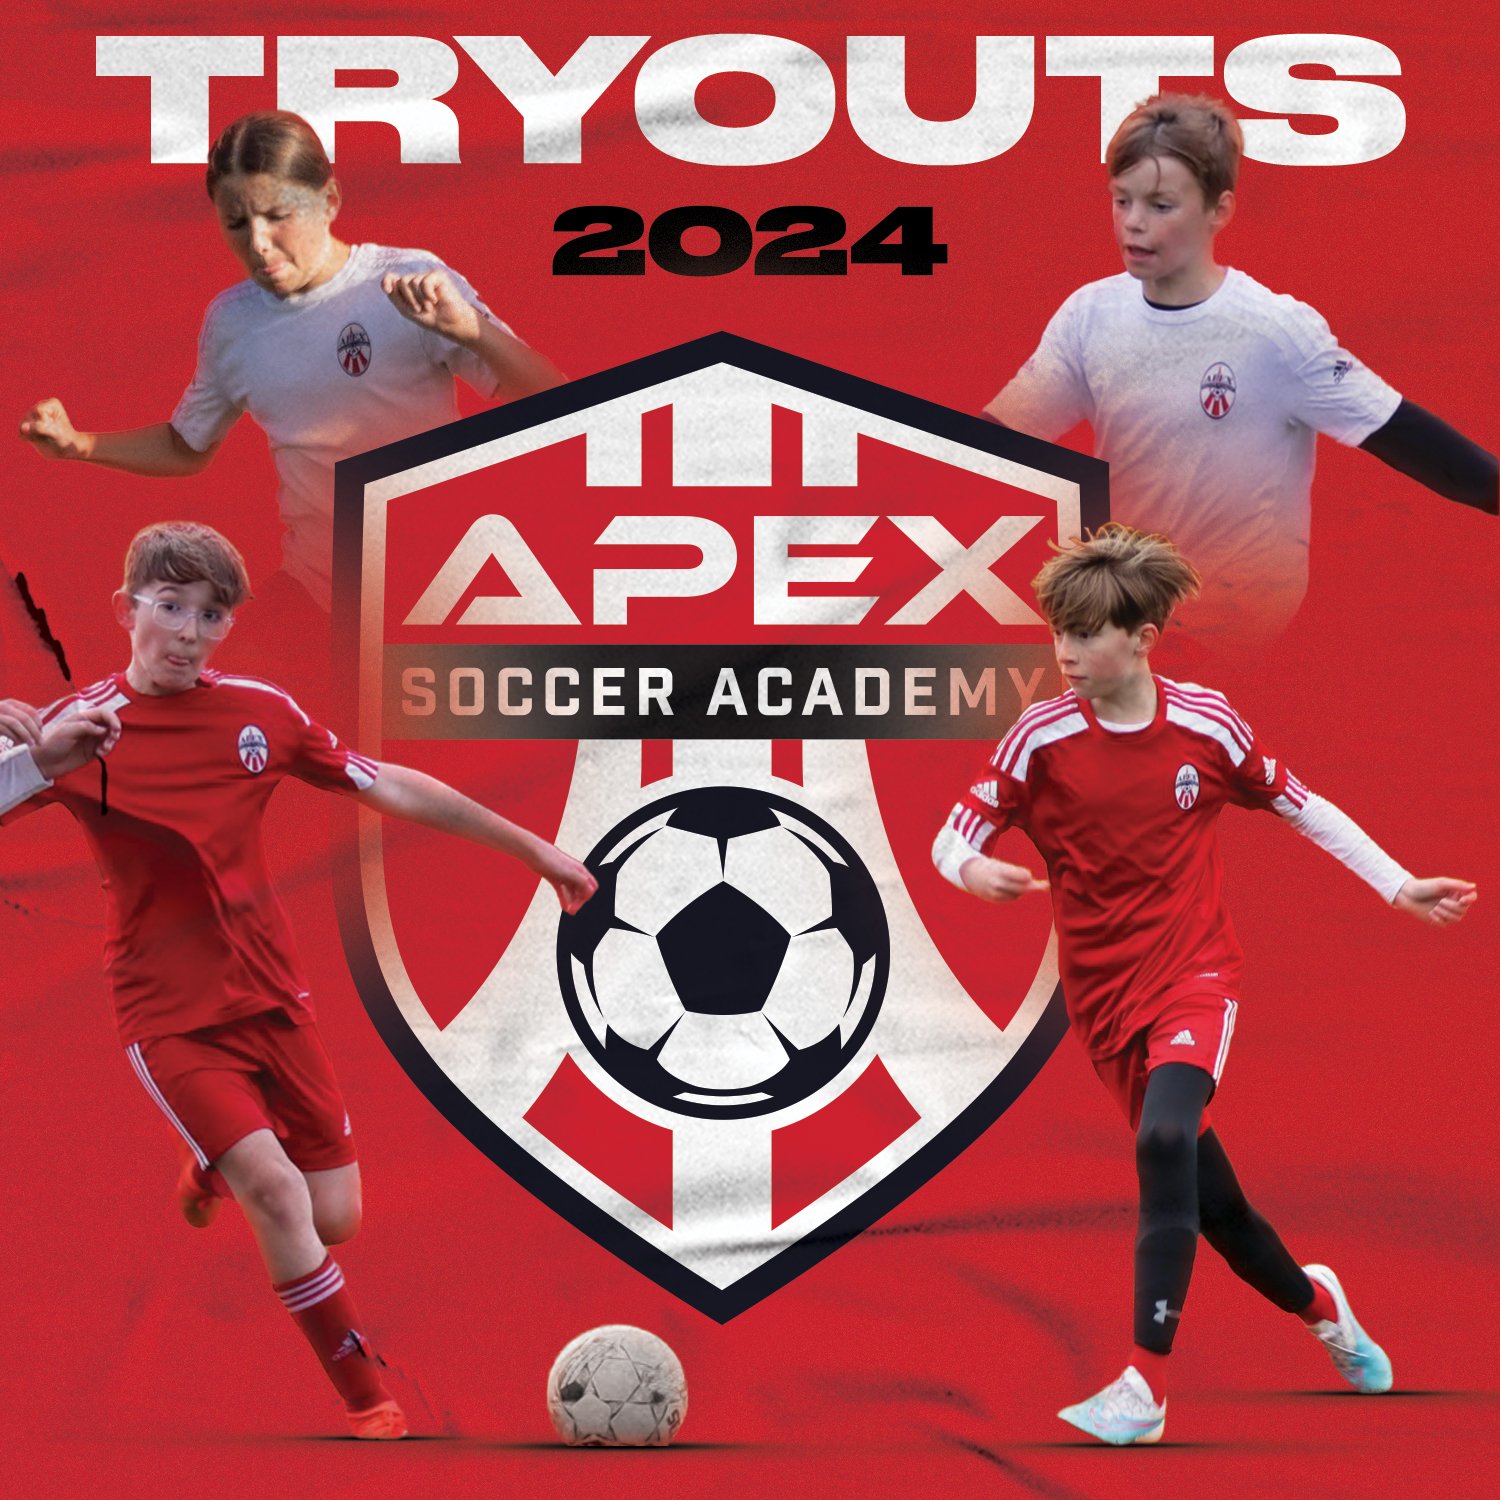 Tryout Registration is open for Apex Select‼ We are less than a month away from our first tryout date

Head to https://www.apexsocceracademy.com/tryouts to get registered. 

All tryouts will take place at:📍The Gregg Young Sports Campus (1401 High Ro